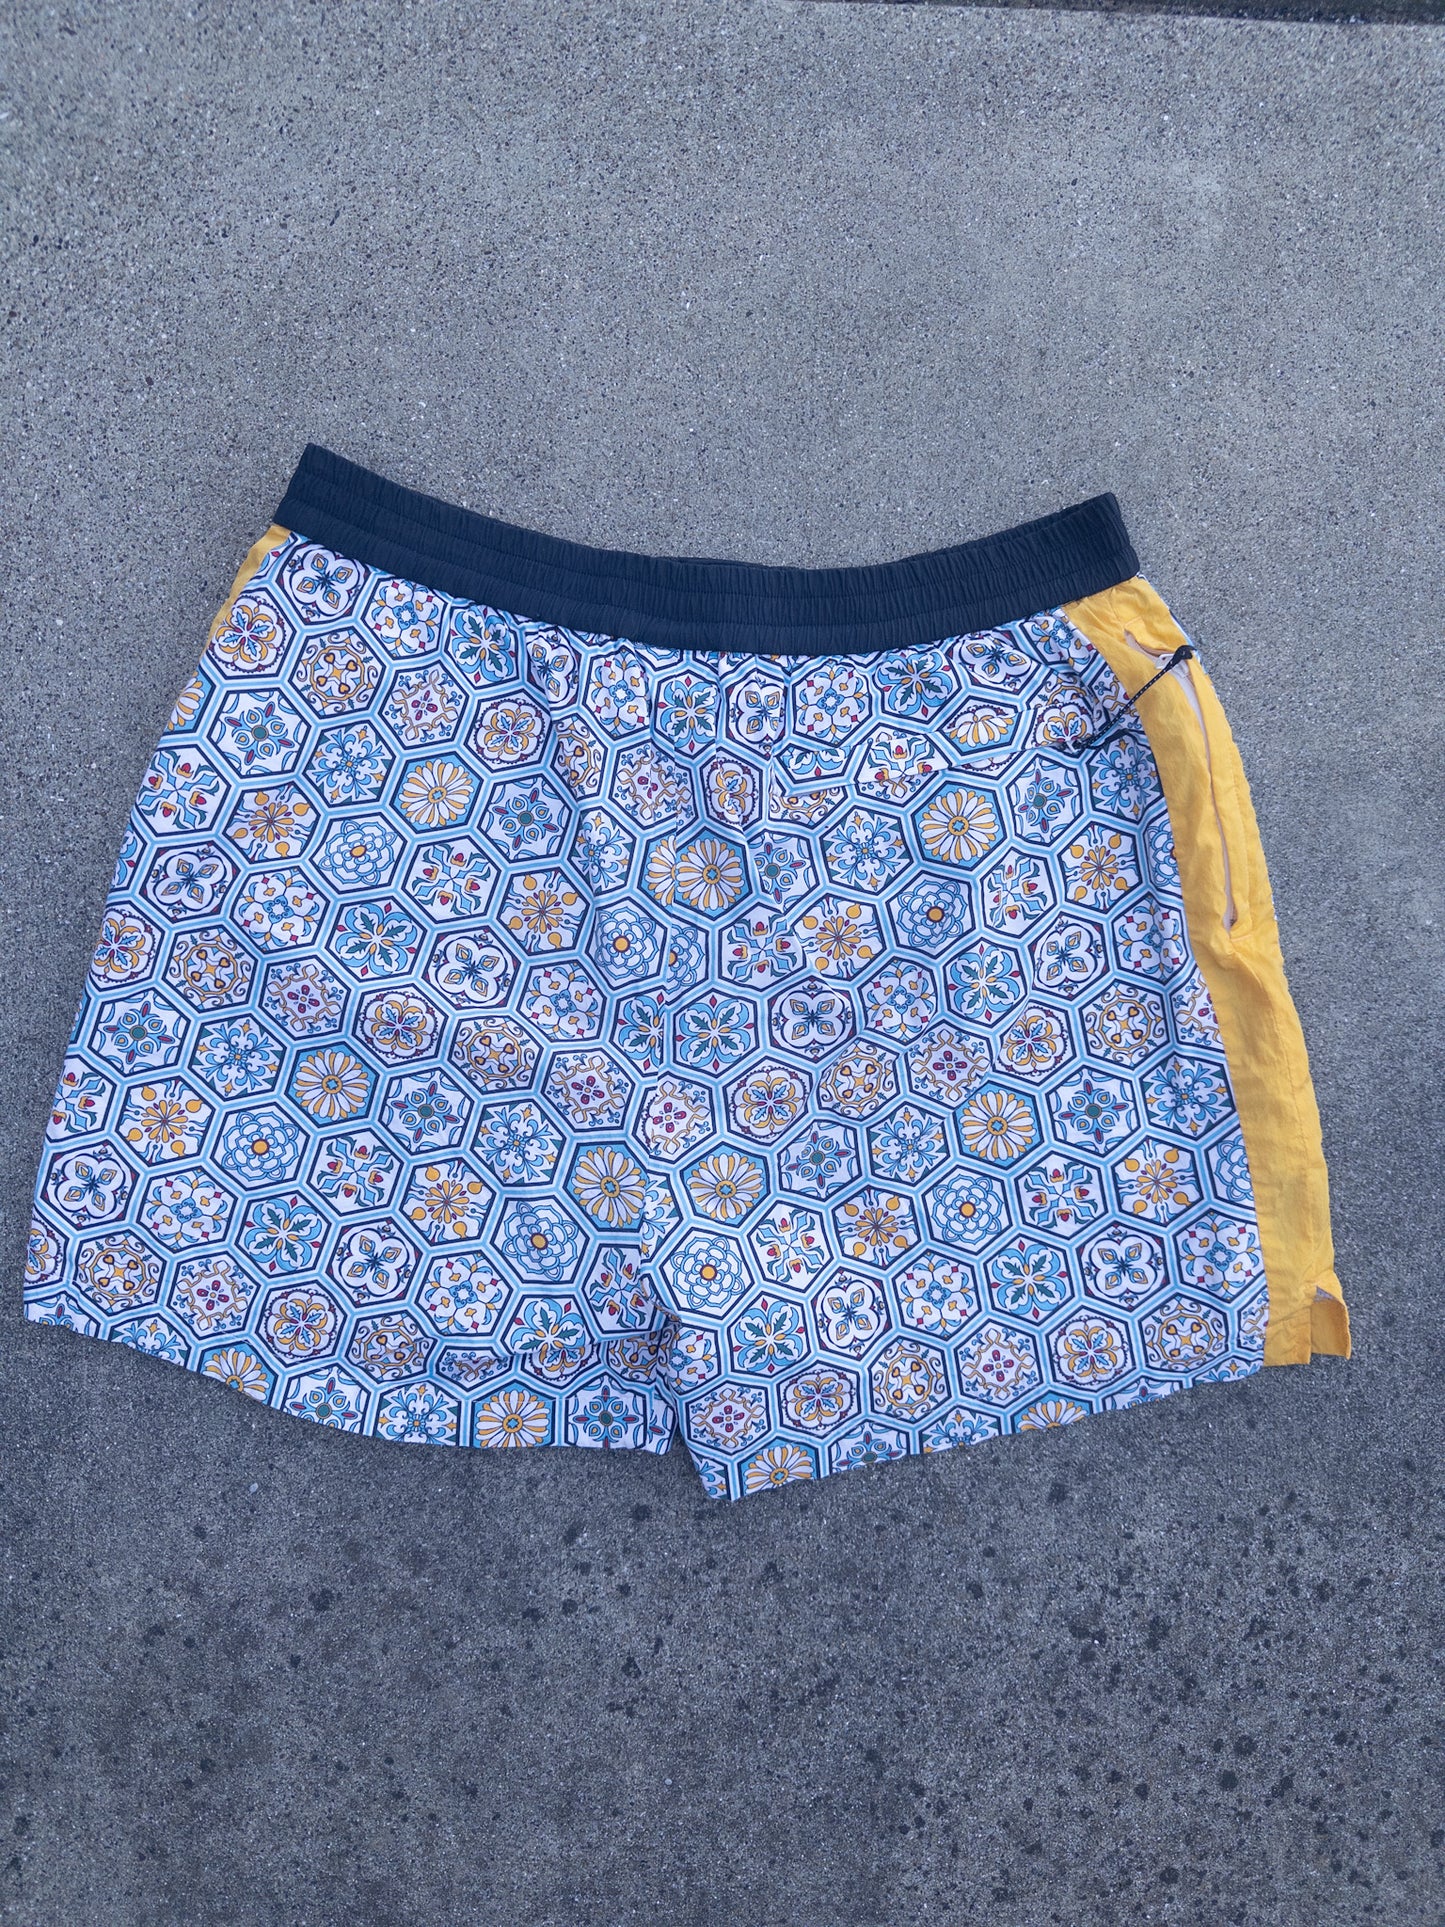 Kith Printed Shorts with Side Panel Size Medium